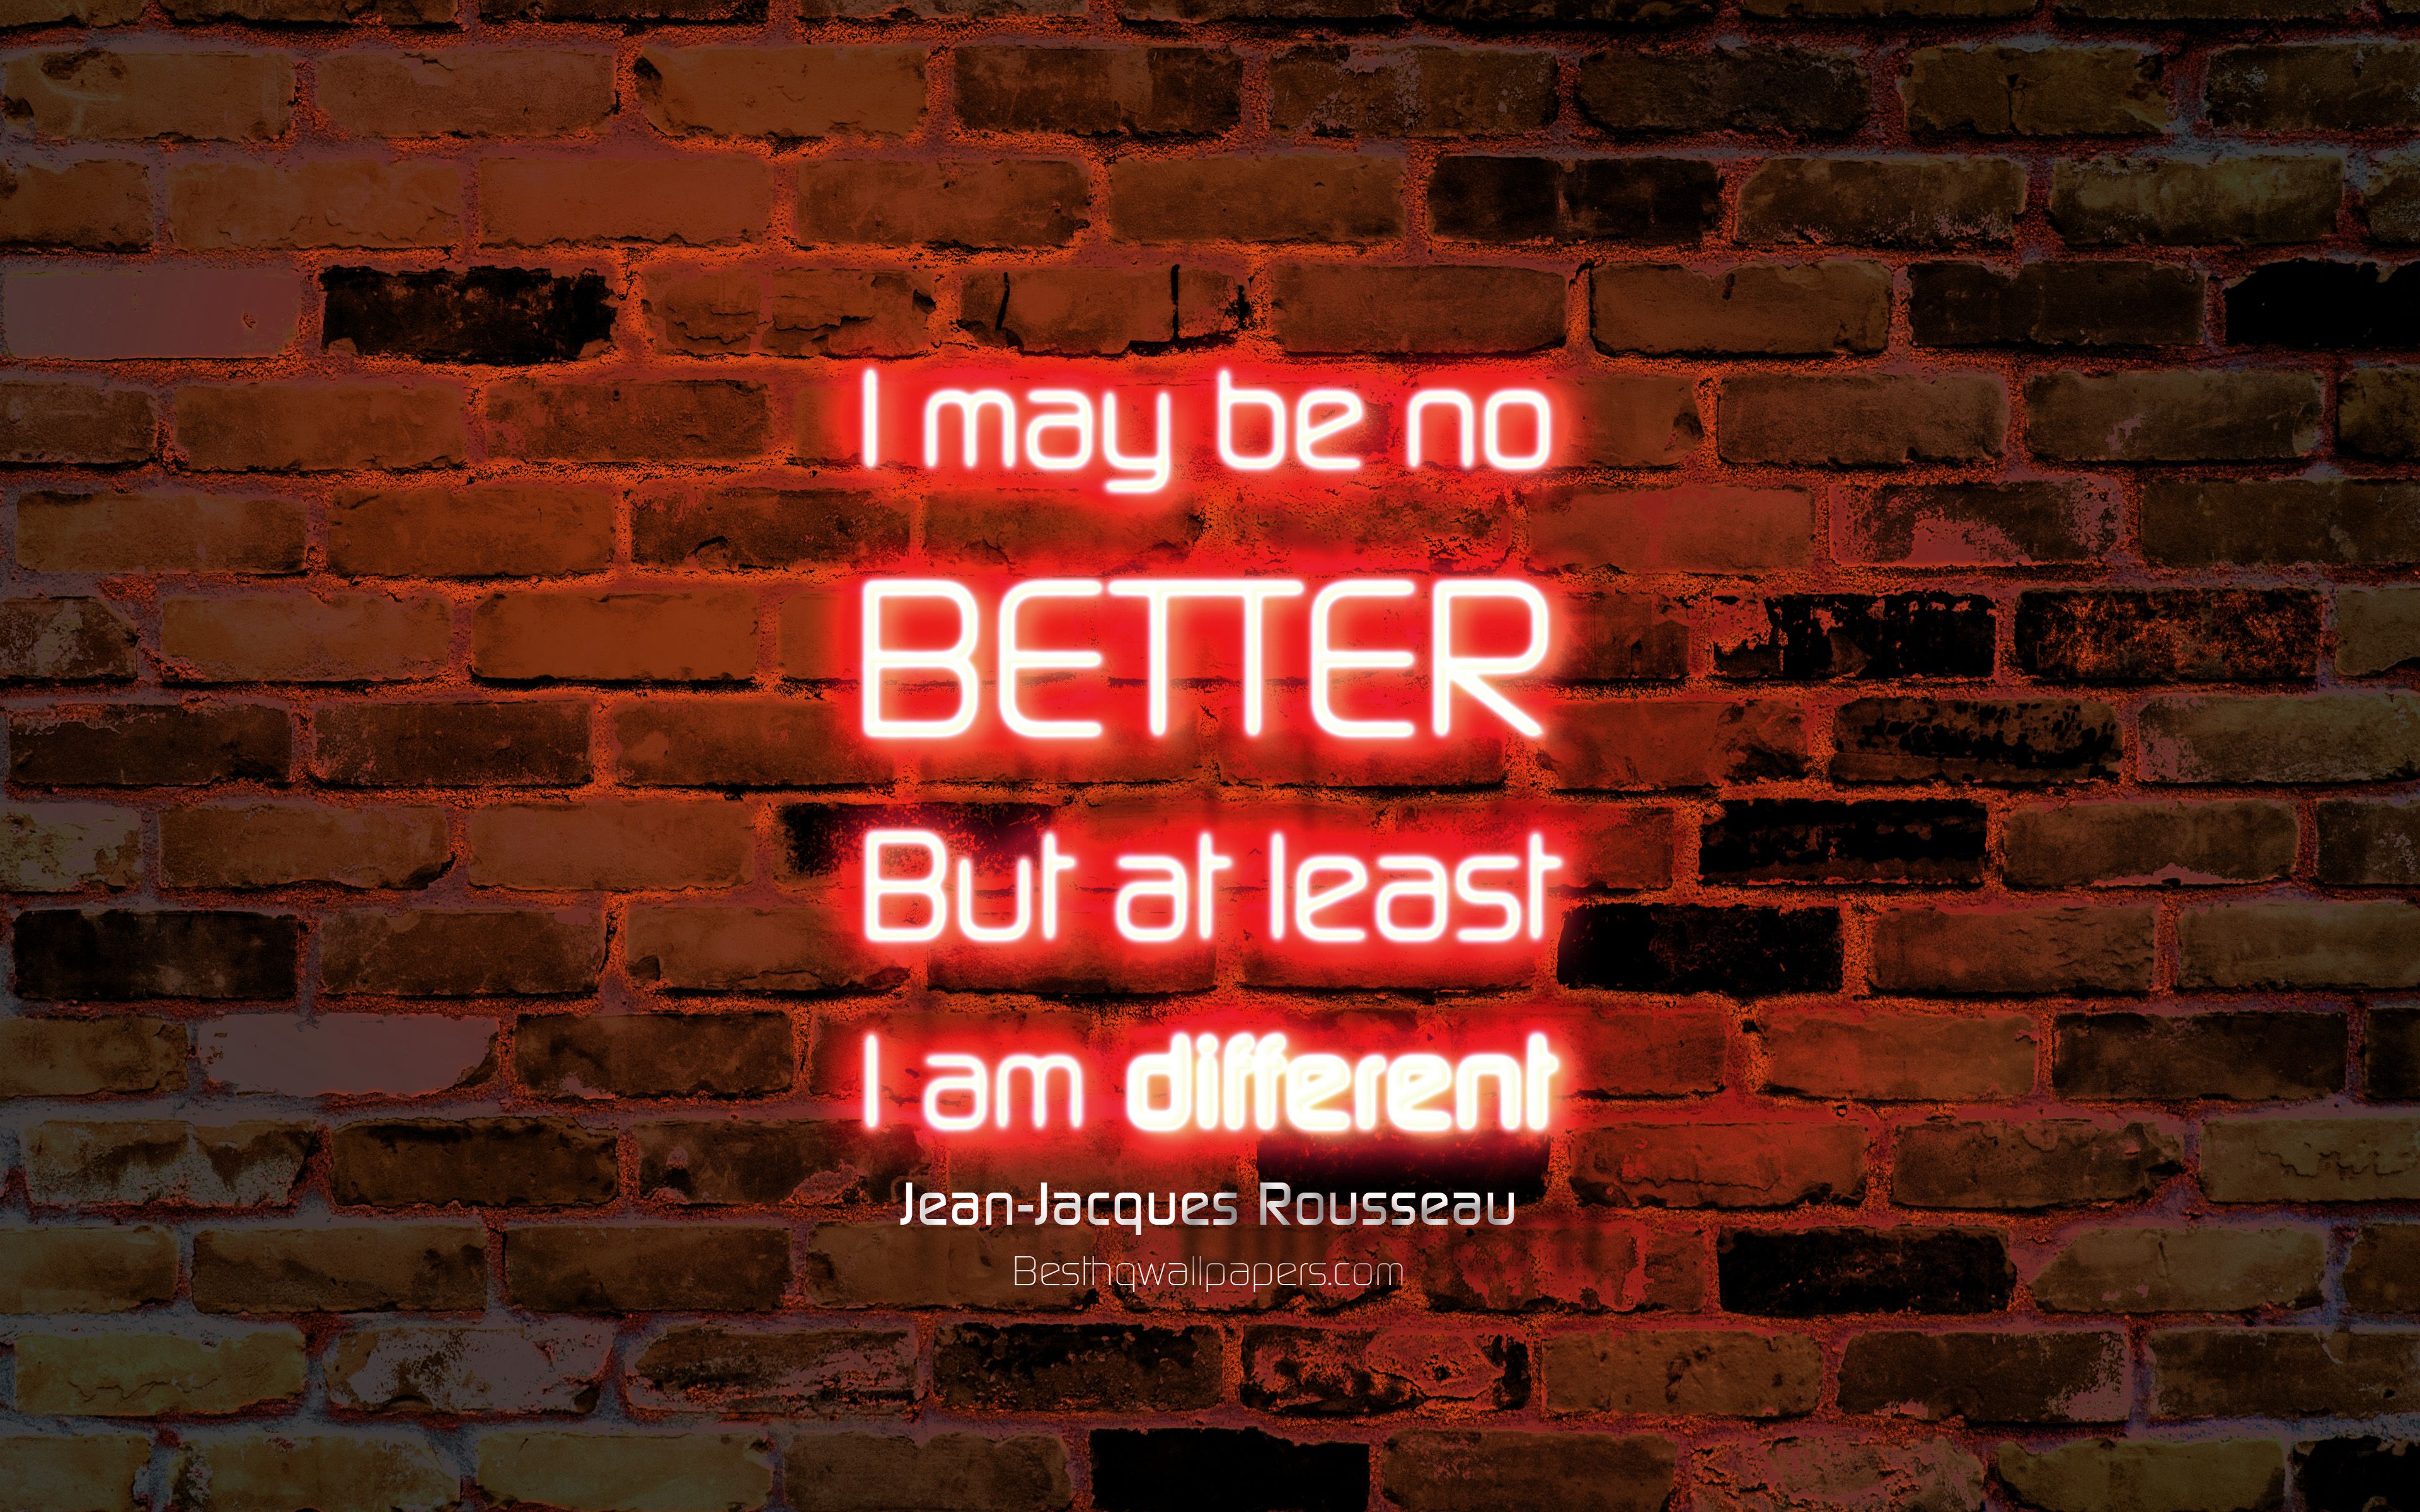 Download Wallpaper I May Be No Better But At Least I Am Different, 4k, Orange Brick Wall, Jean Jacques Rousseau Quotes, Popular Quotes, Neon Text, Inspiration, Jean Jacques Rousseau, Quotes About Life For Desktop